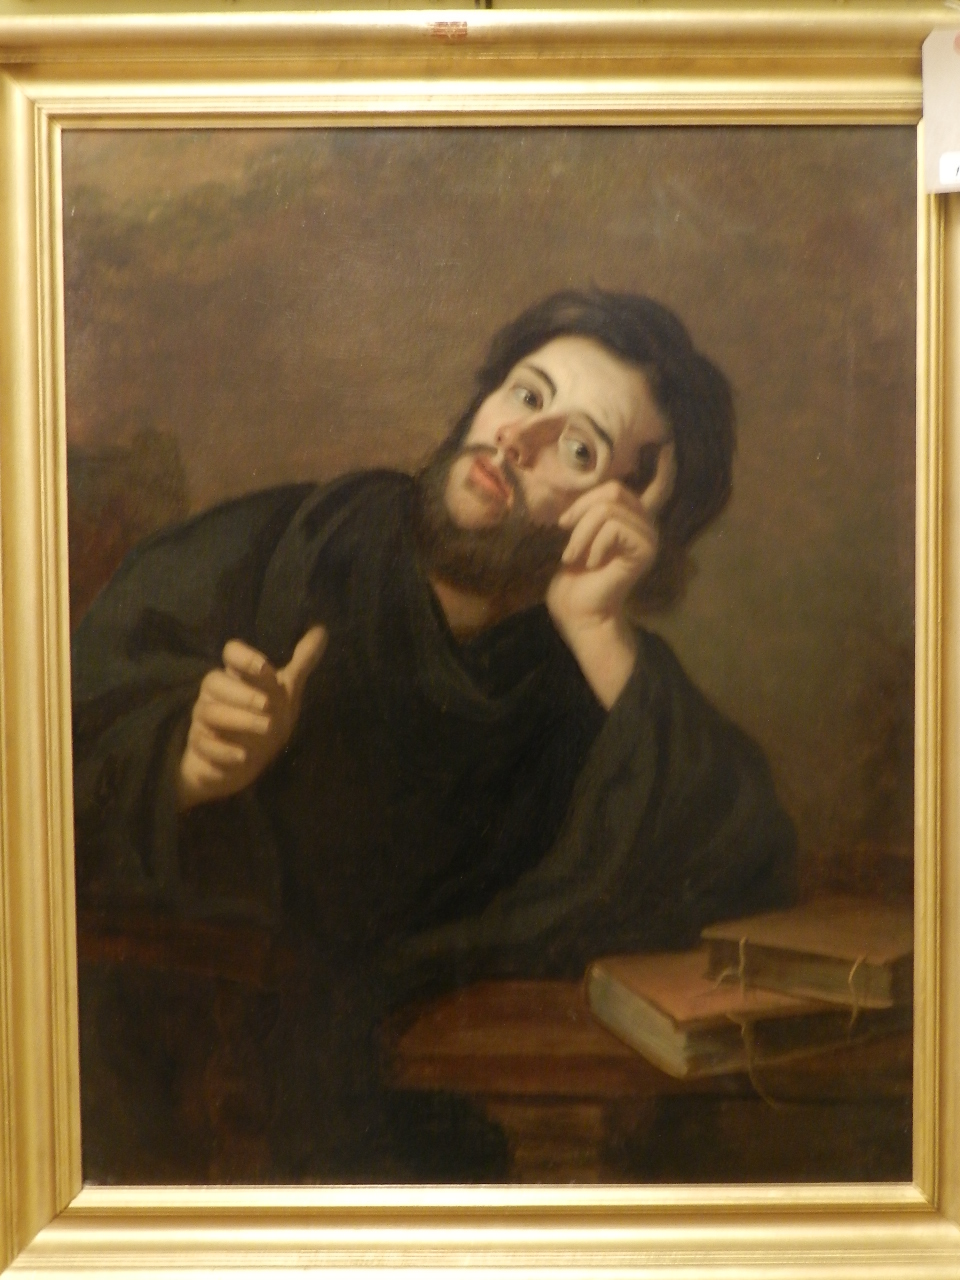 19th century Continental school, a half length portrait of a monk in habit, deep in scholarly